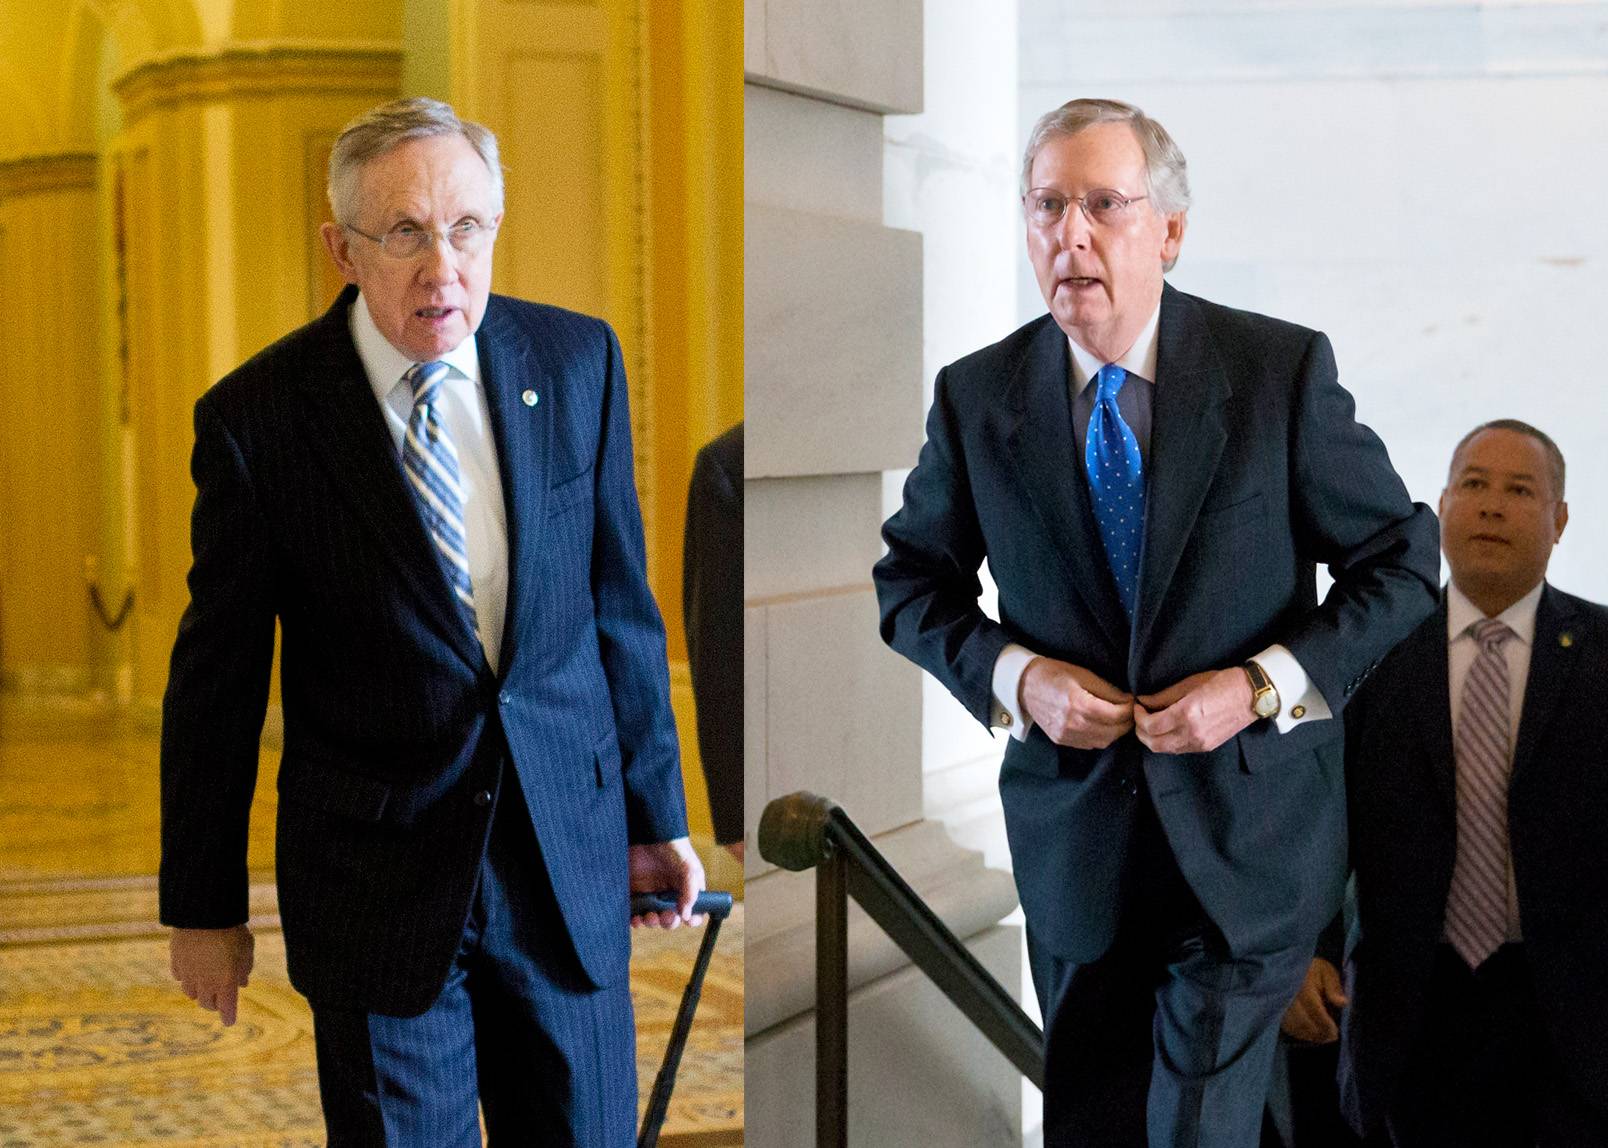 Harry Reid and Mitch McConnell